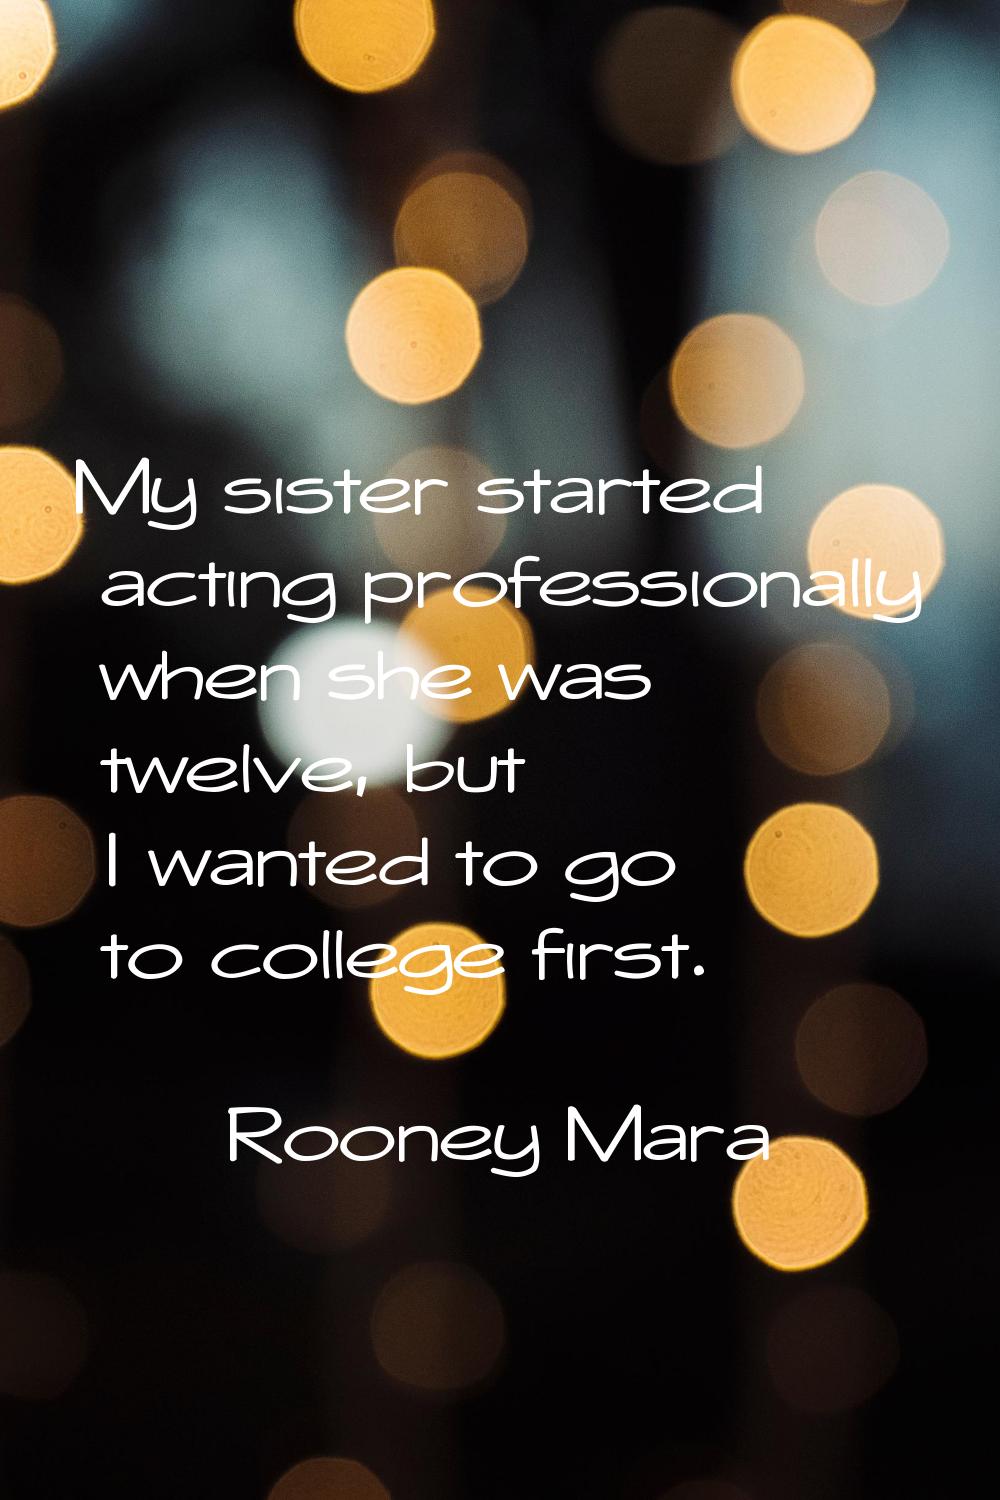 My sister started acting professionally when she was twelve, but I wanted to go to college first.